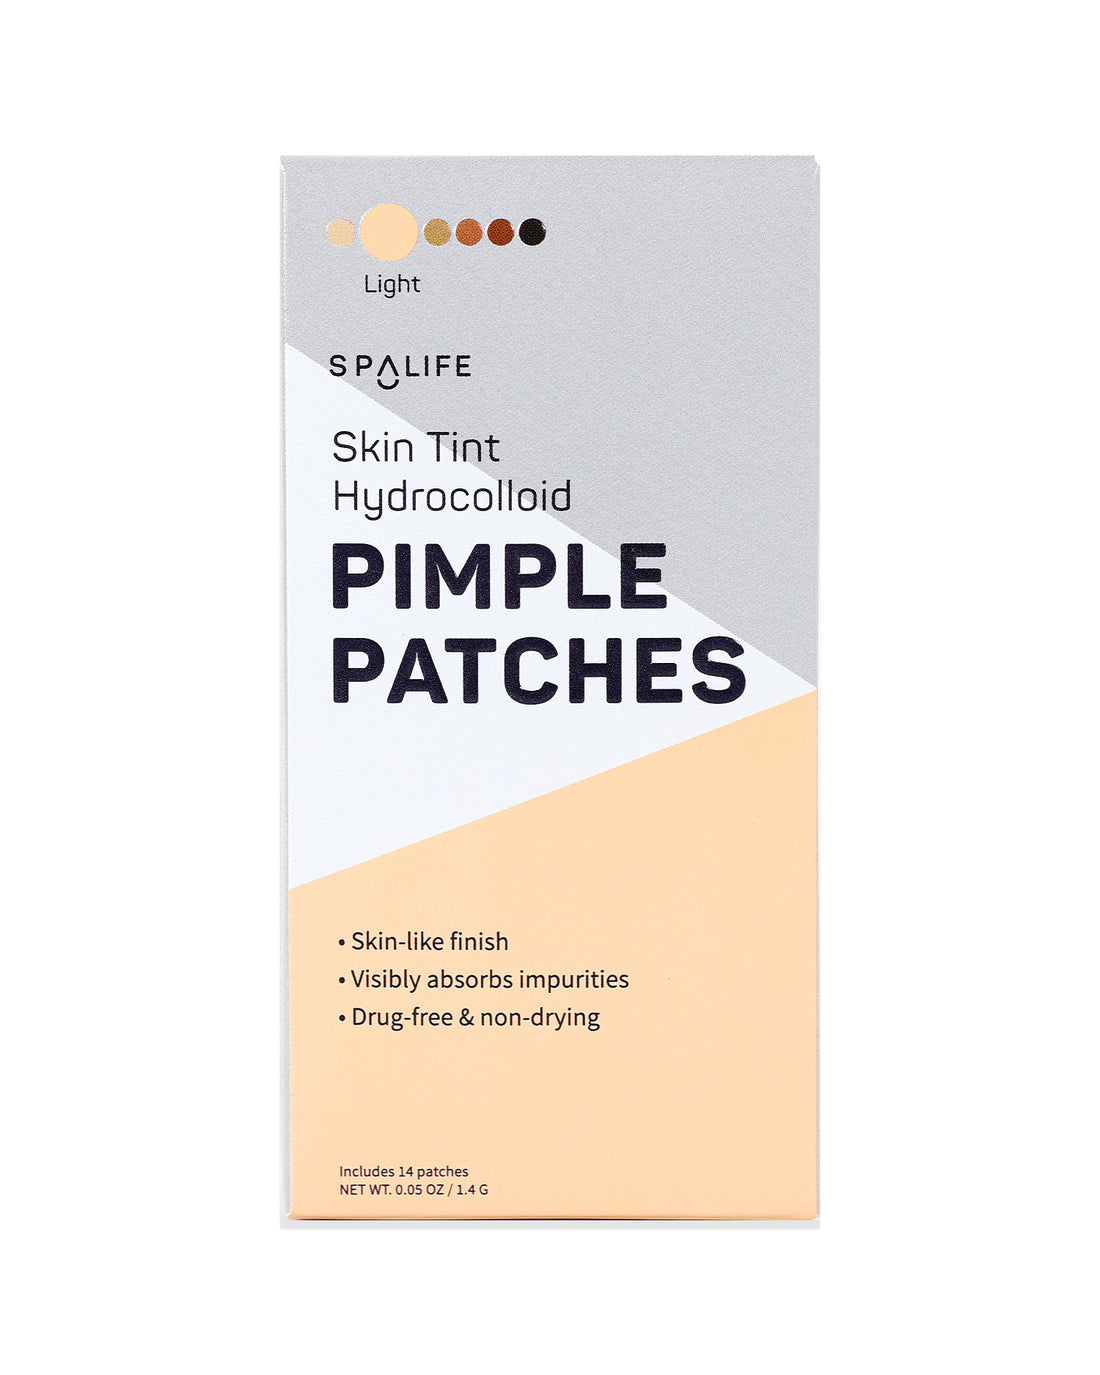 Skin_tint_pimple_patches_packe-31